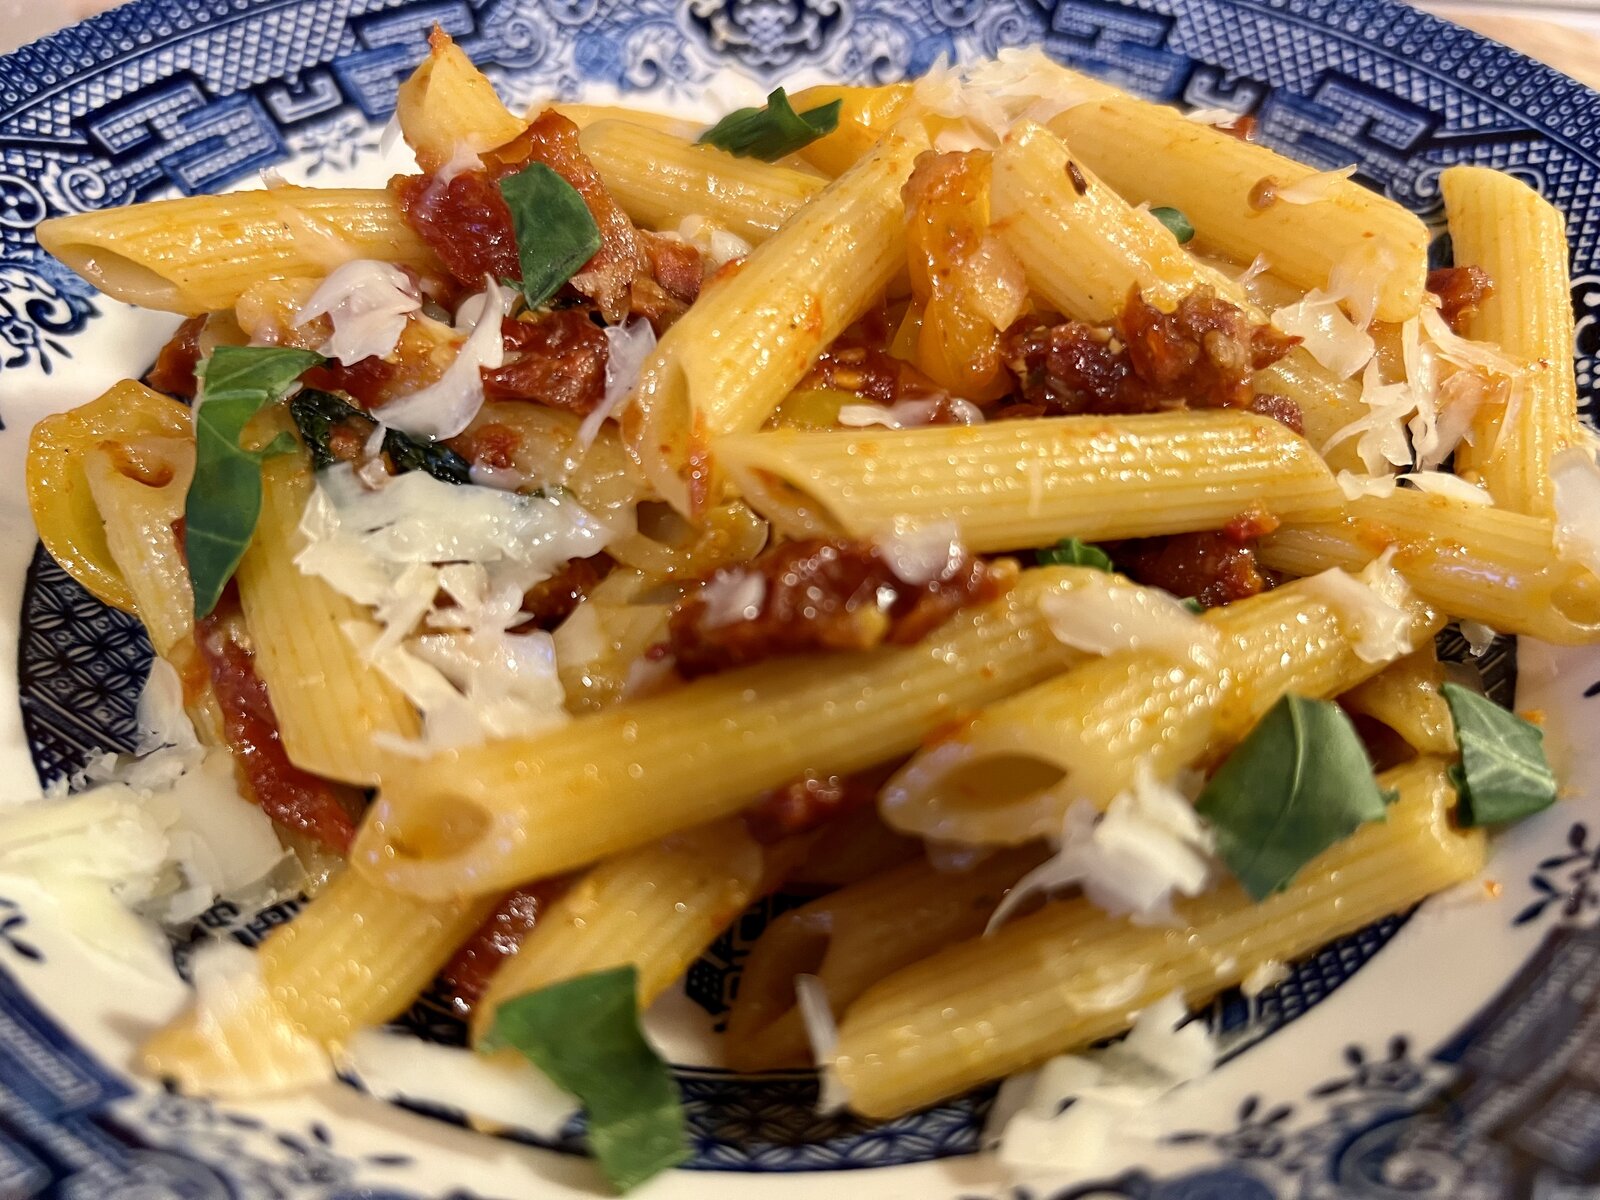 Penne in spicy sundried tomato sauce